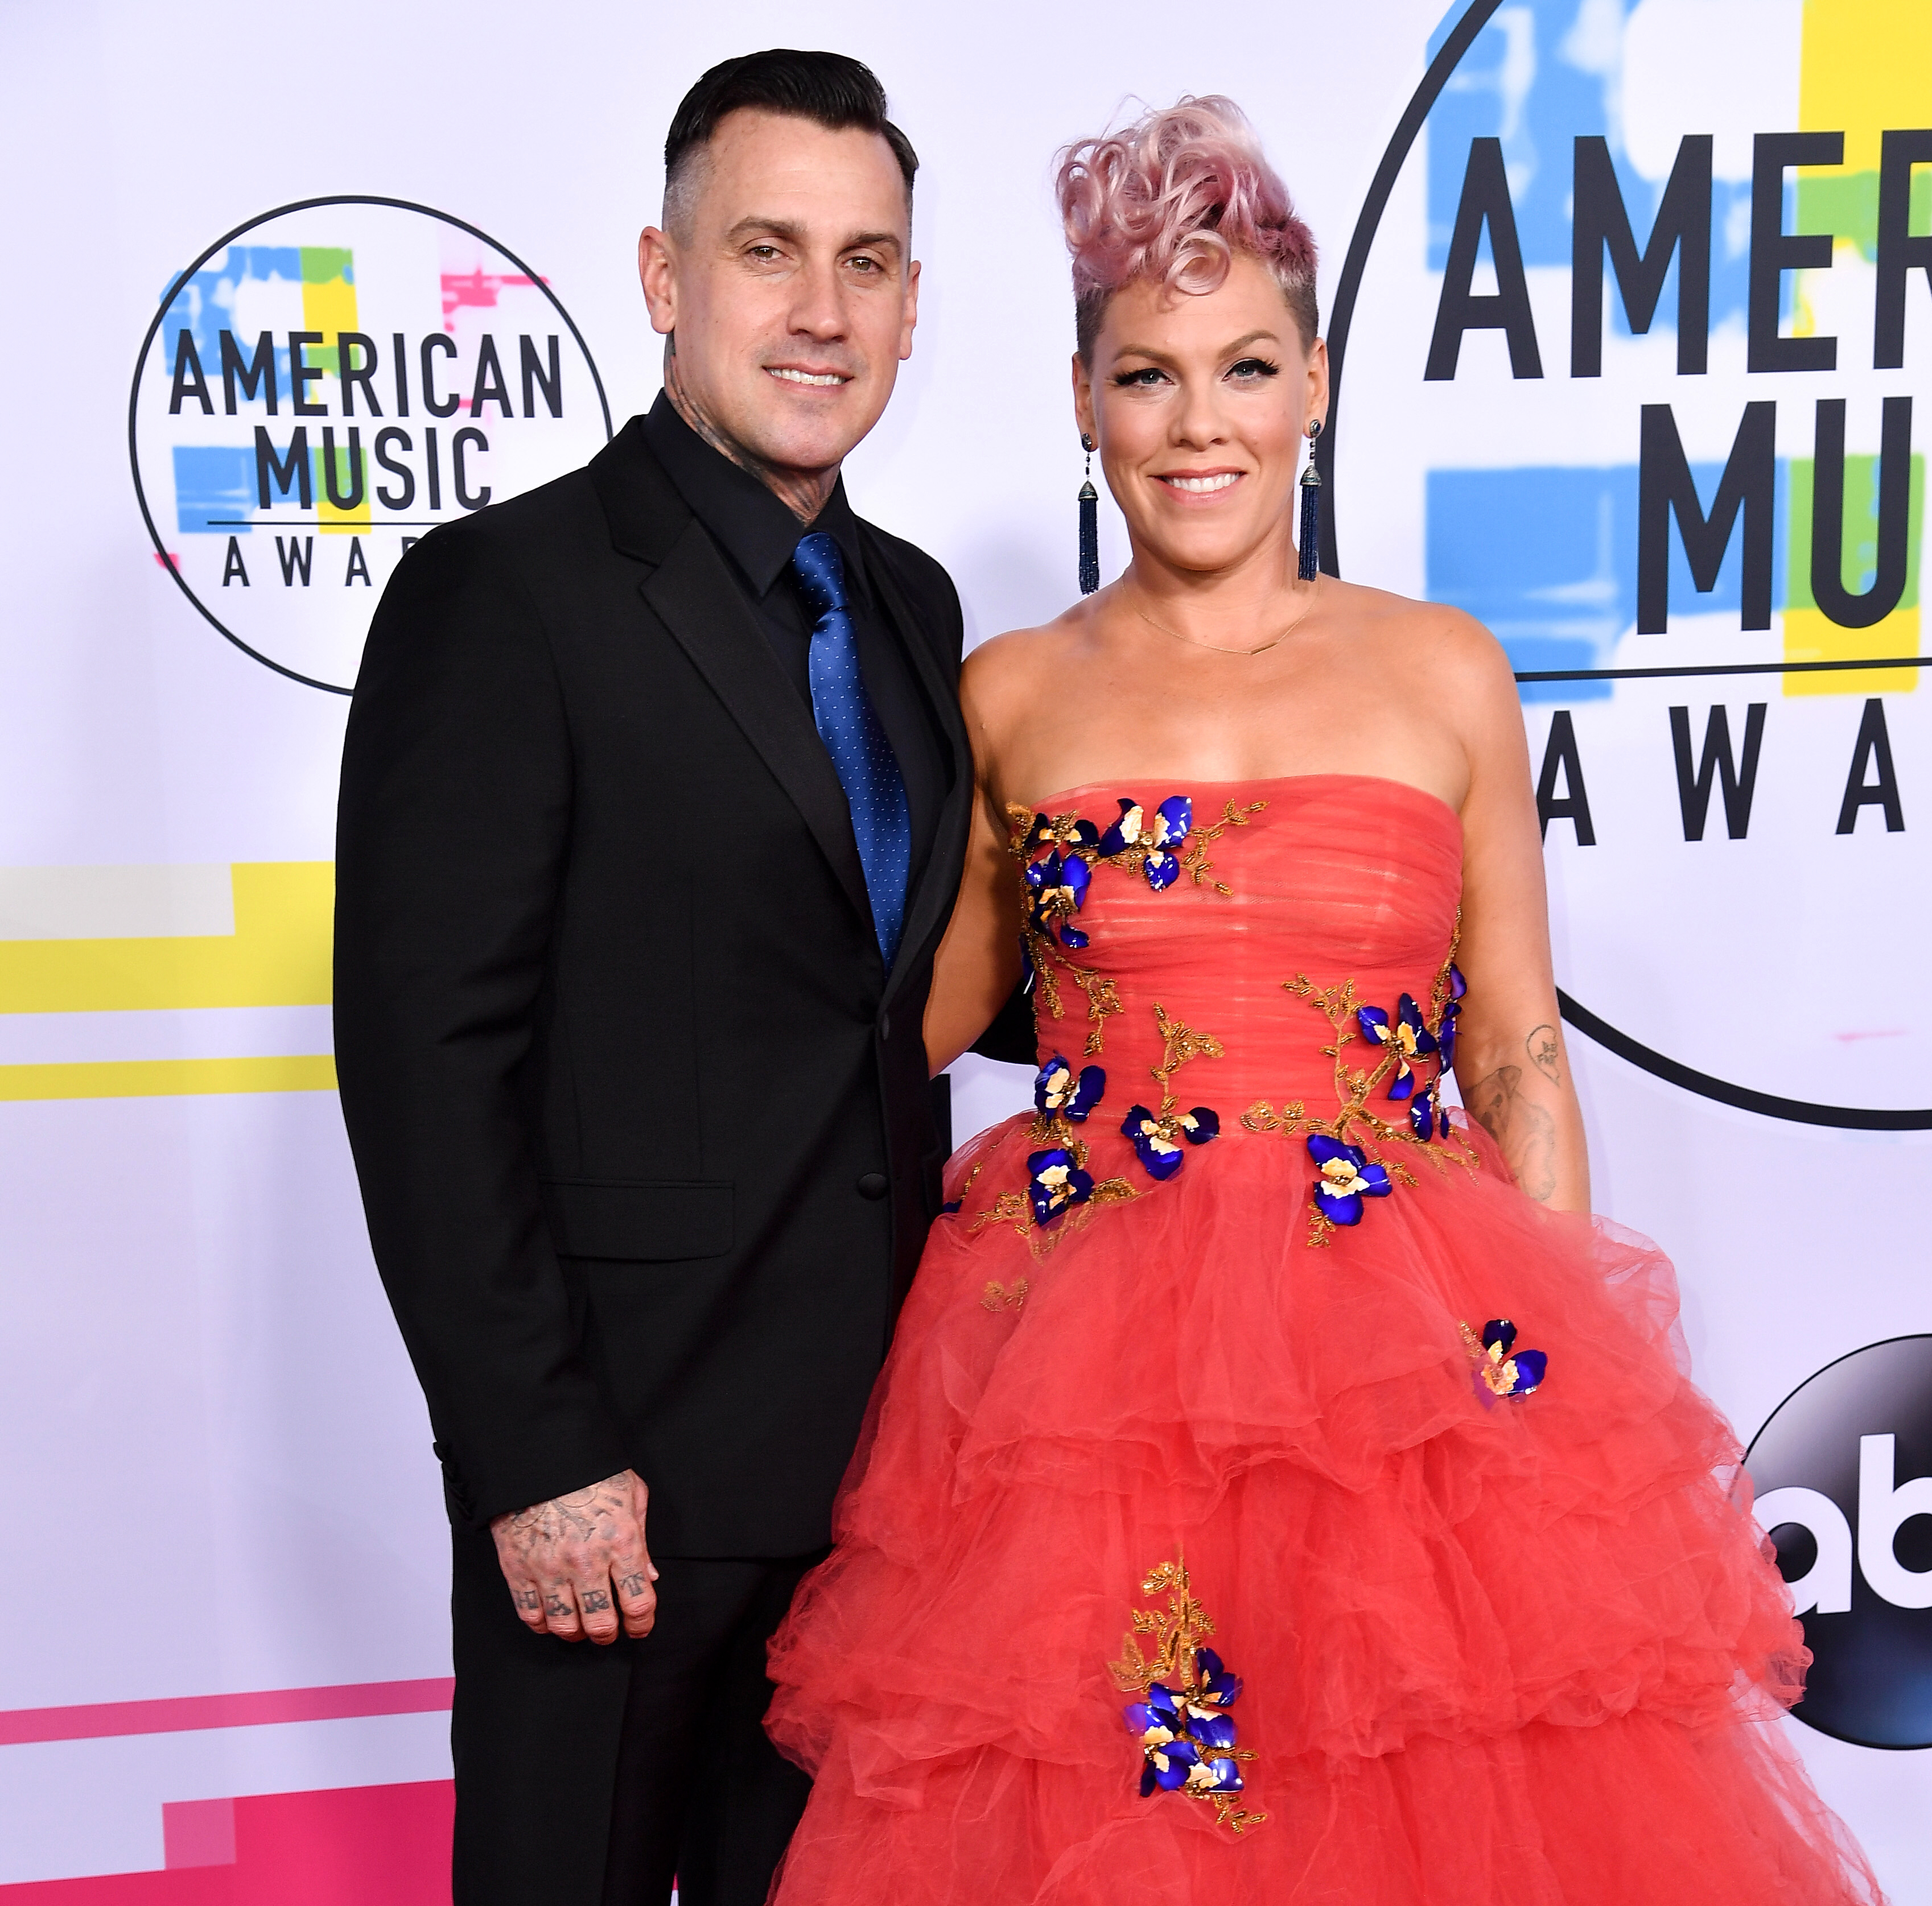 Pink and Carey Hart 'Would Not Be Together' Without Couples Counseling